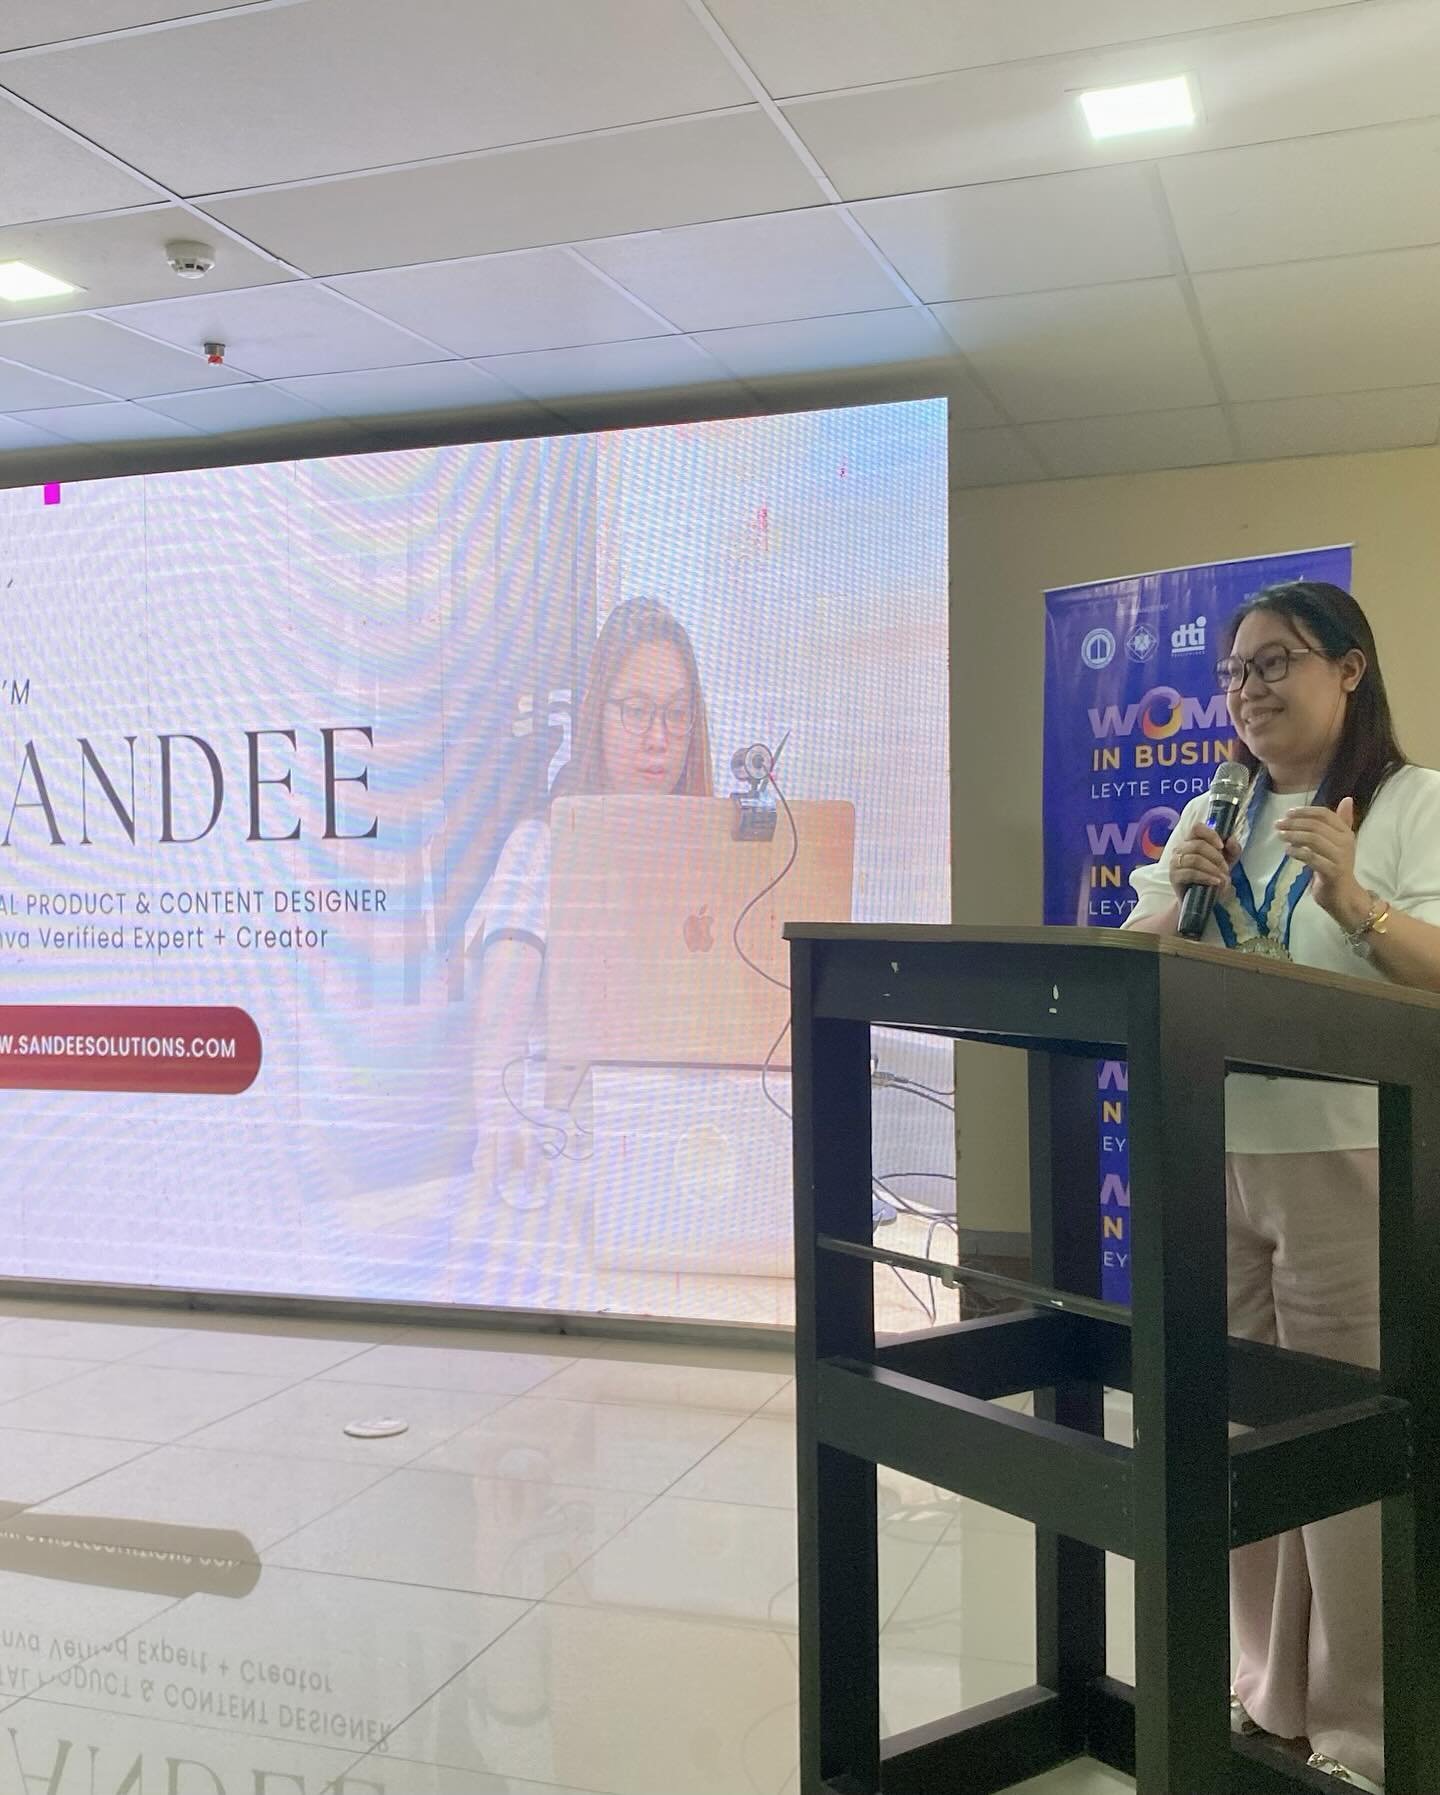 Women in Business Leyte Forum 2024
Thank you for having me 🥰🥰🥰